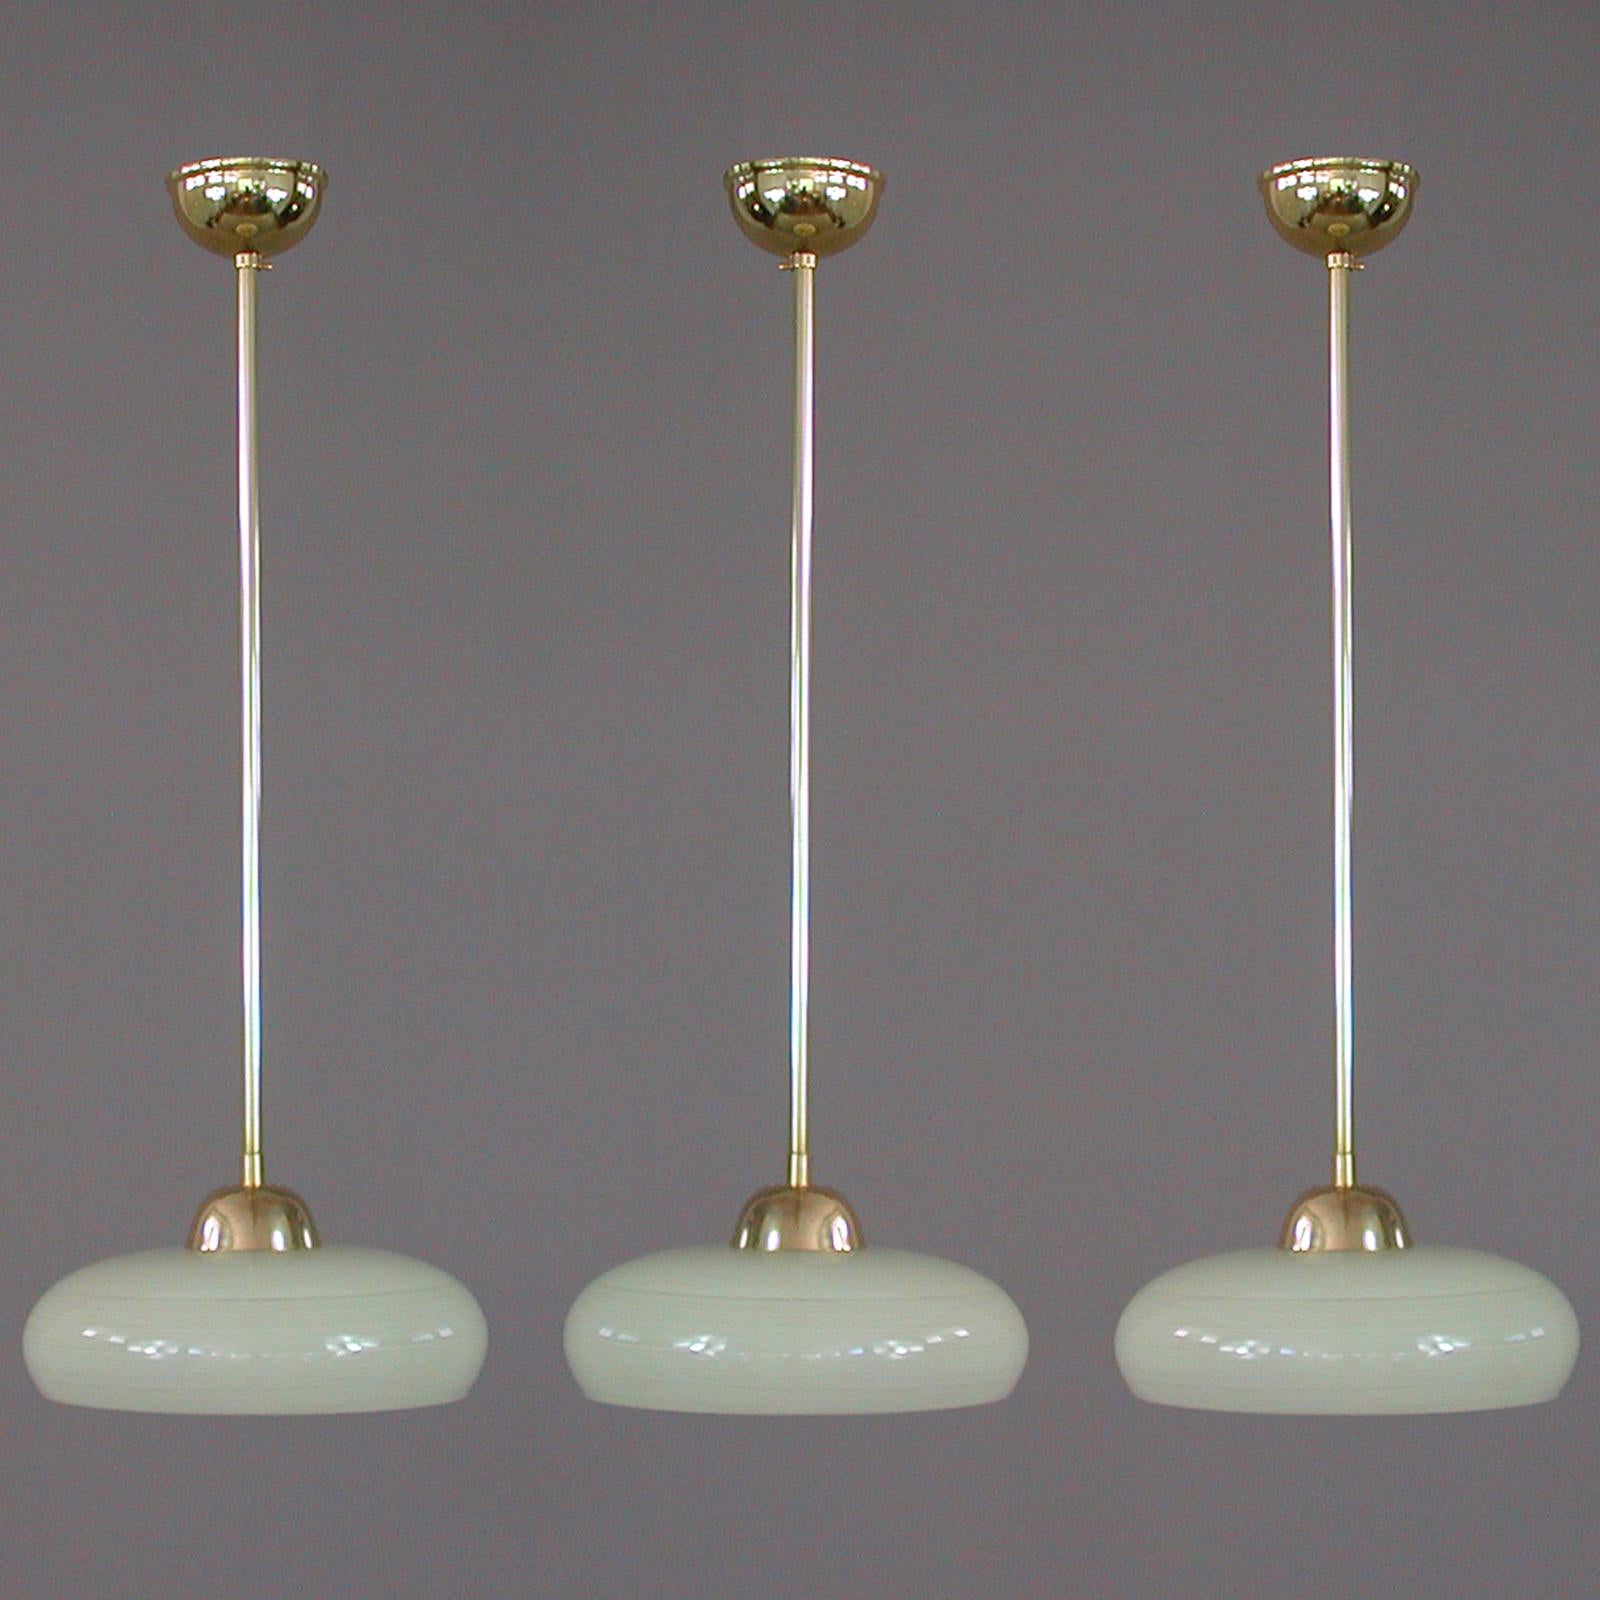 This elegant German pendant was designed and manufactured in Germany in the 1930s. The light features a cream colored opaline glass shade in typical Bauhaus design with striped glass decor and brass hardware. Good vintage condition with one E27